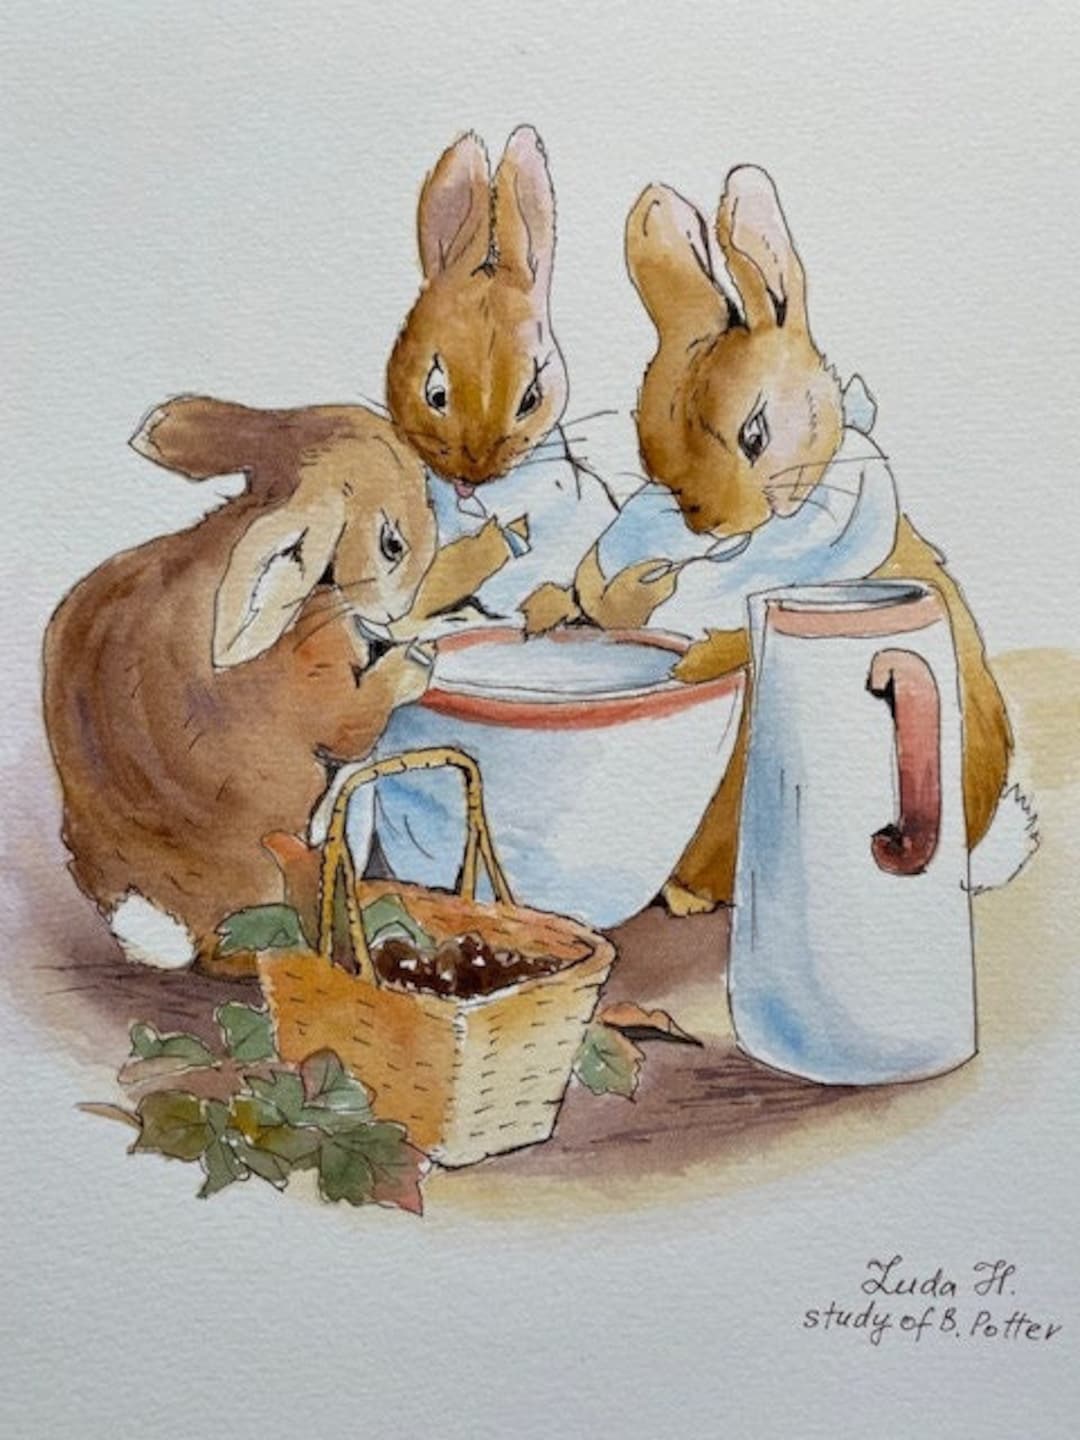 Peter Rabbit Story Original Drawing in Ink and Watercolor Painting